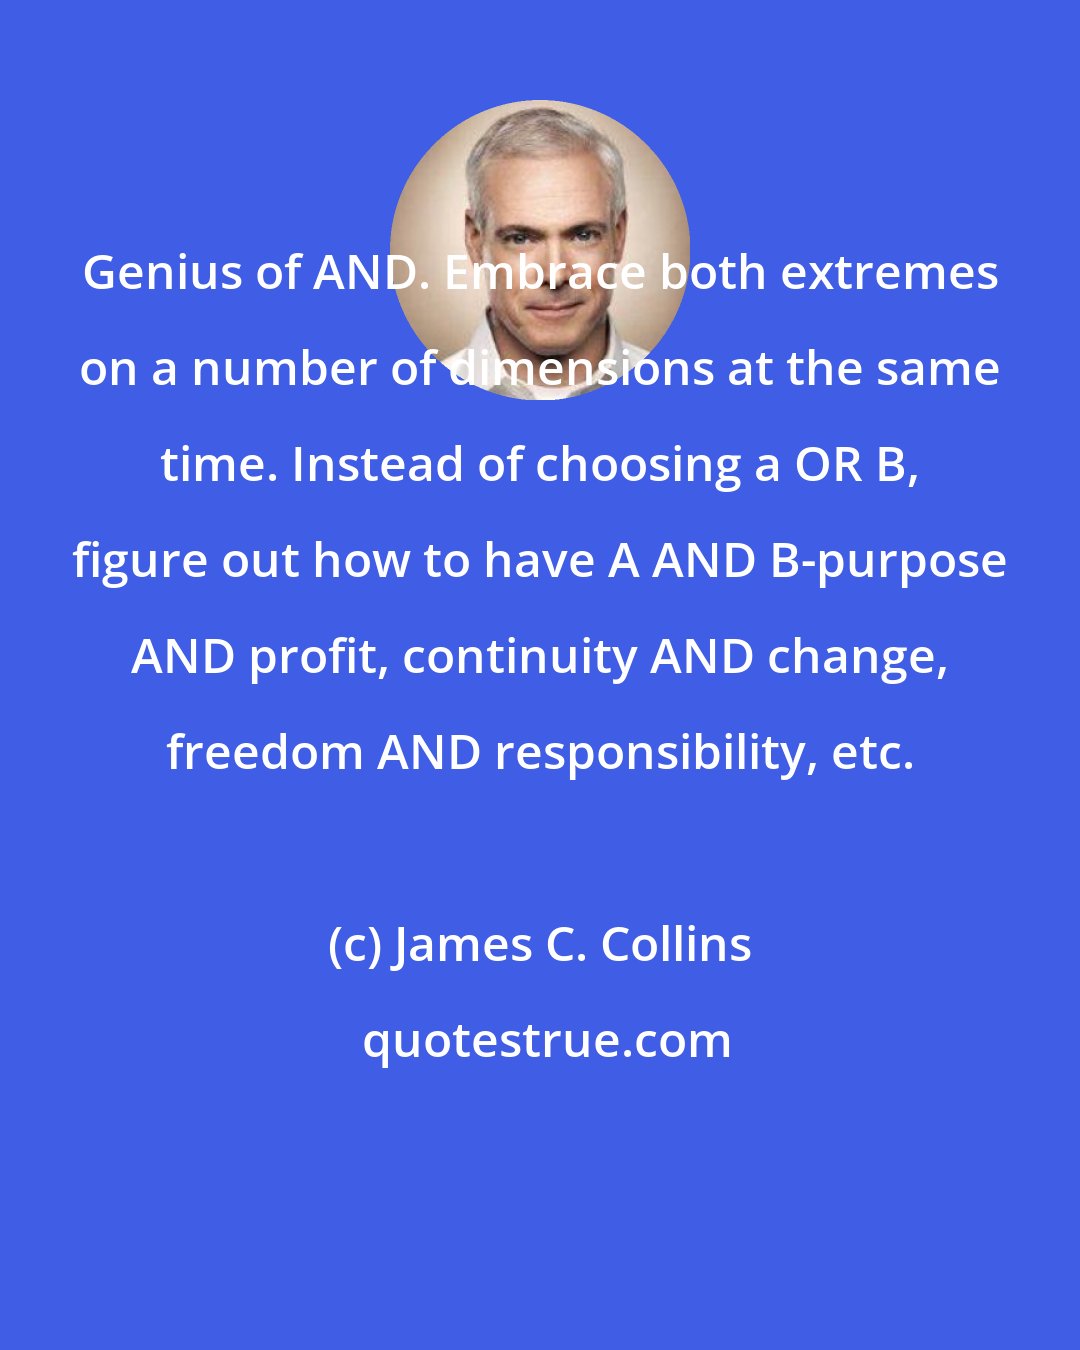 James C. Collins: Genius of AND. Embrace both extremes on a number of dimensions at the same time. Instead of choosing a OR B, figure out how to have A AND B-purpose AND profit, continuity AND change, freedom AND responsibility, etc.